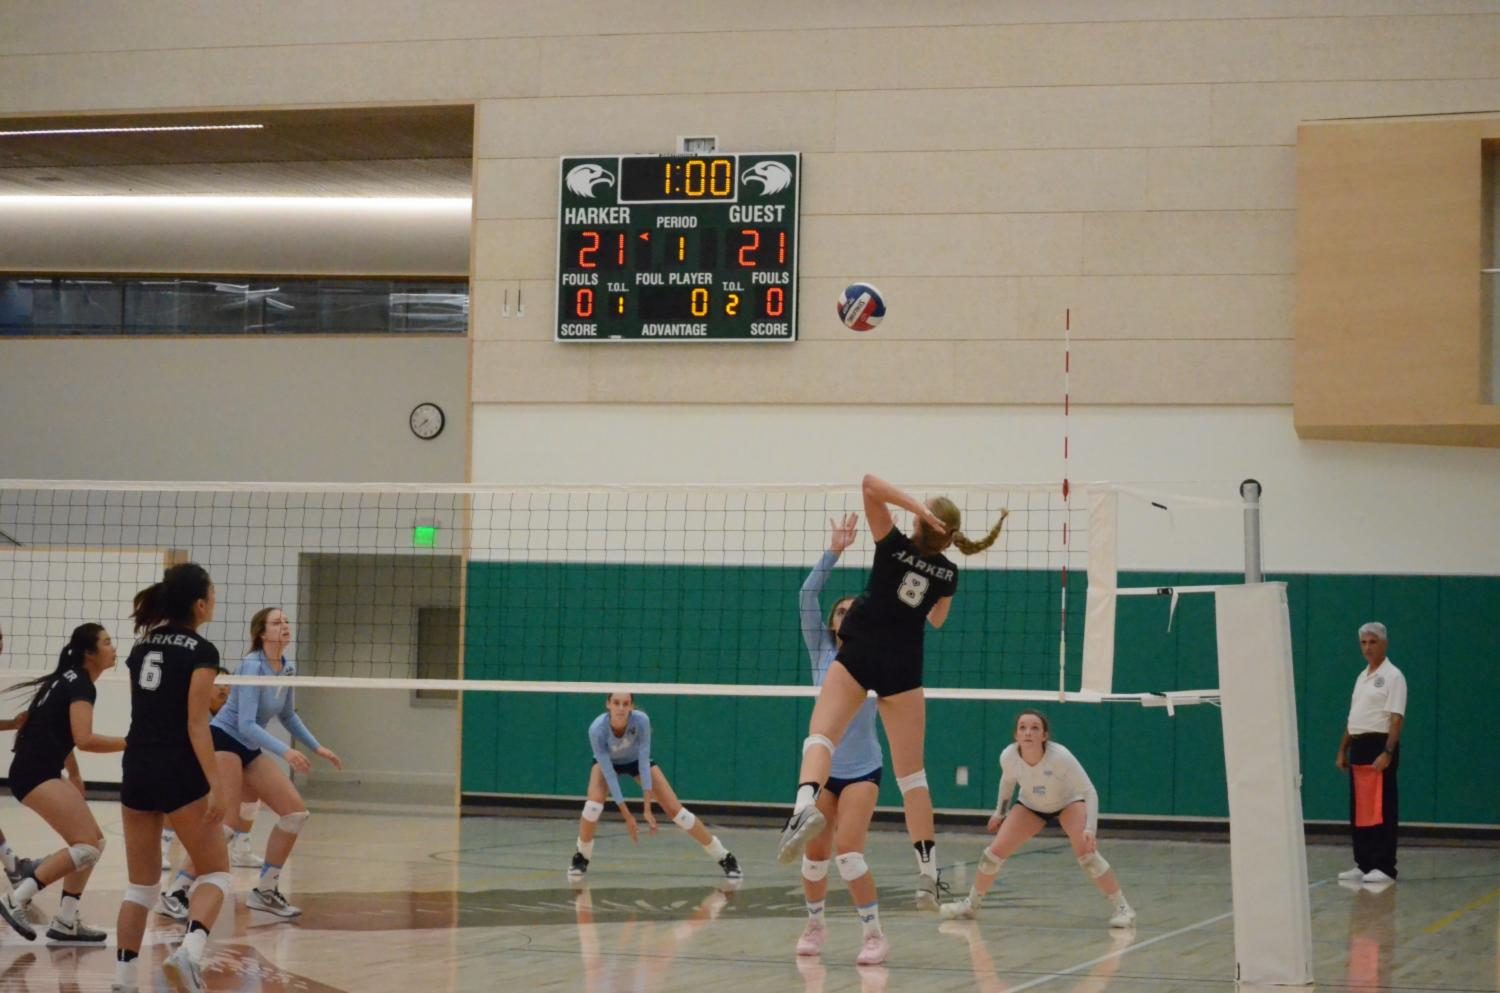 Isabella Spradlin (12) faces two Valley Christian blockers as she jumps to hit the ball over the net. The teams next game is their league opener against Sacred Heart Preparatory next Thursday.